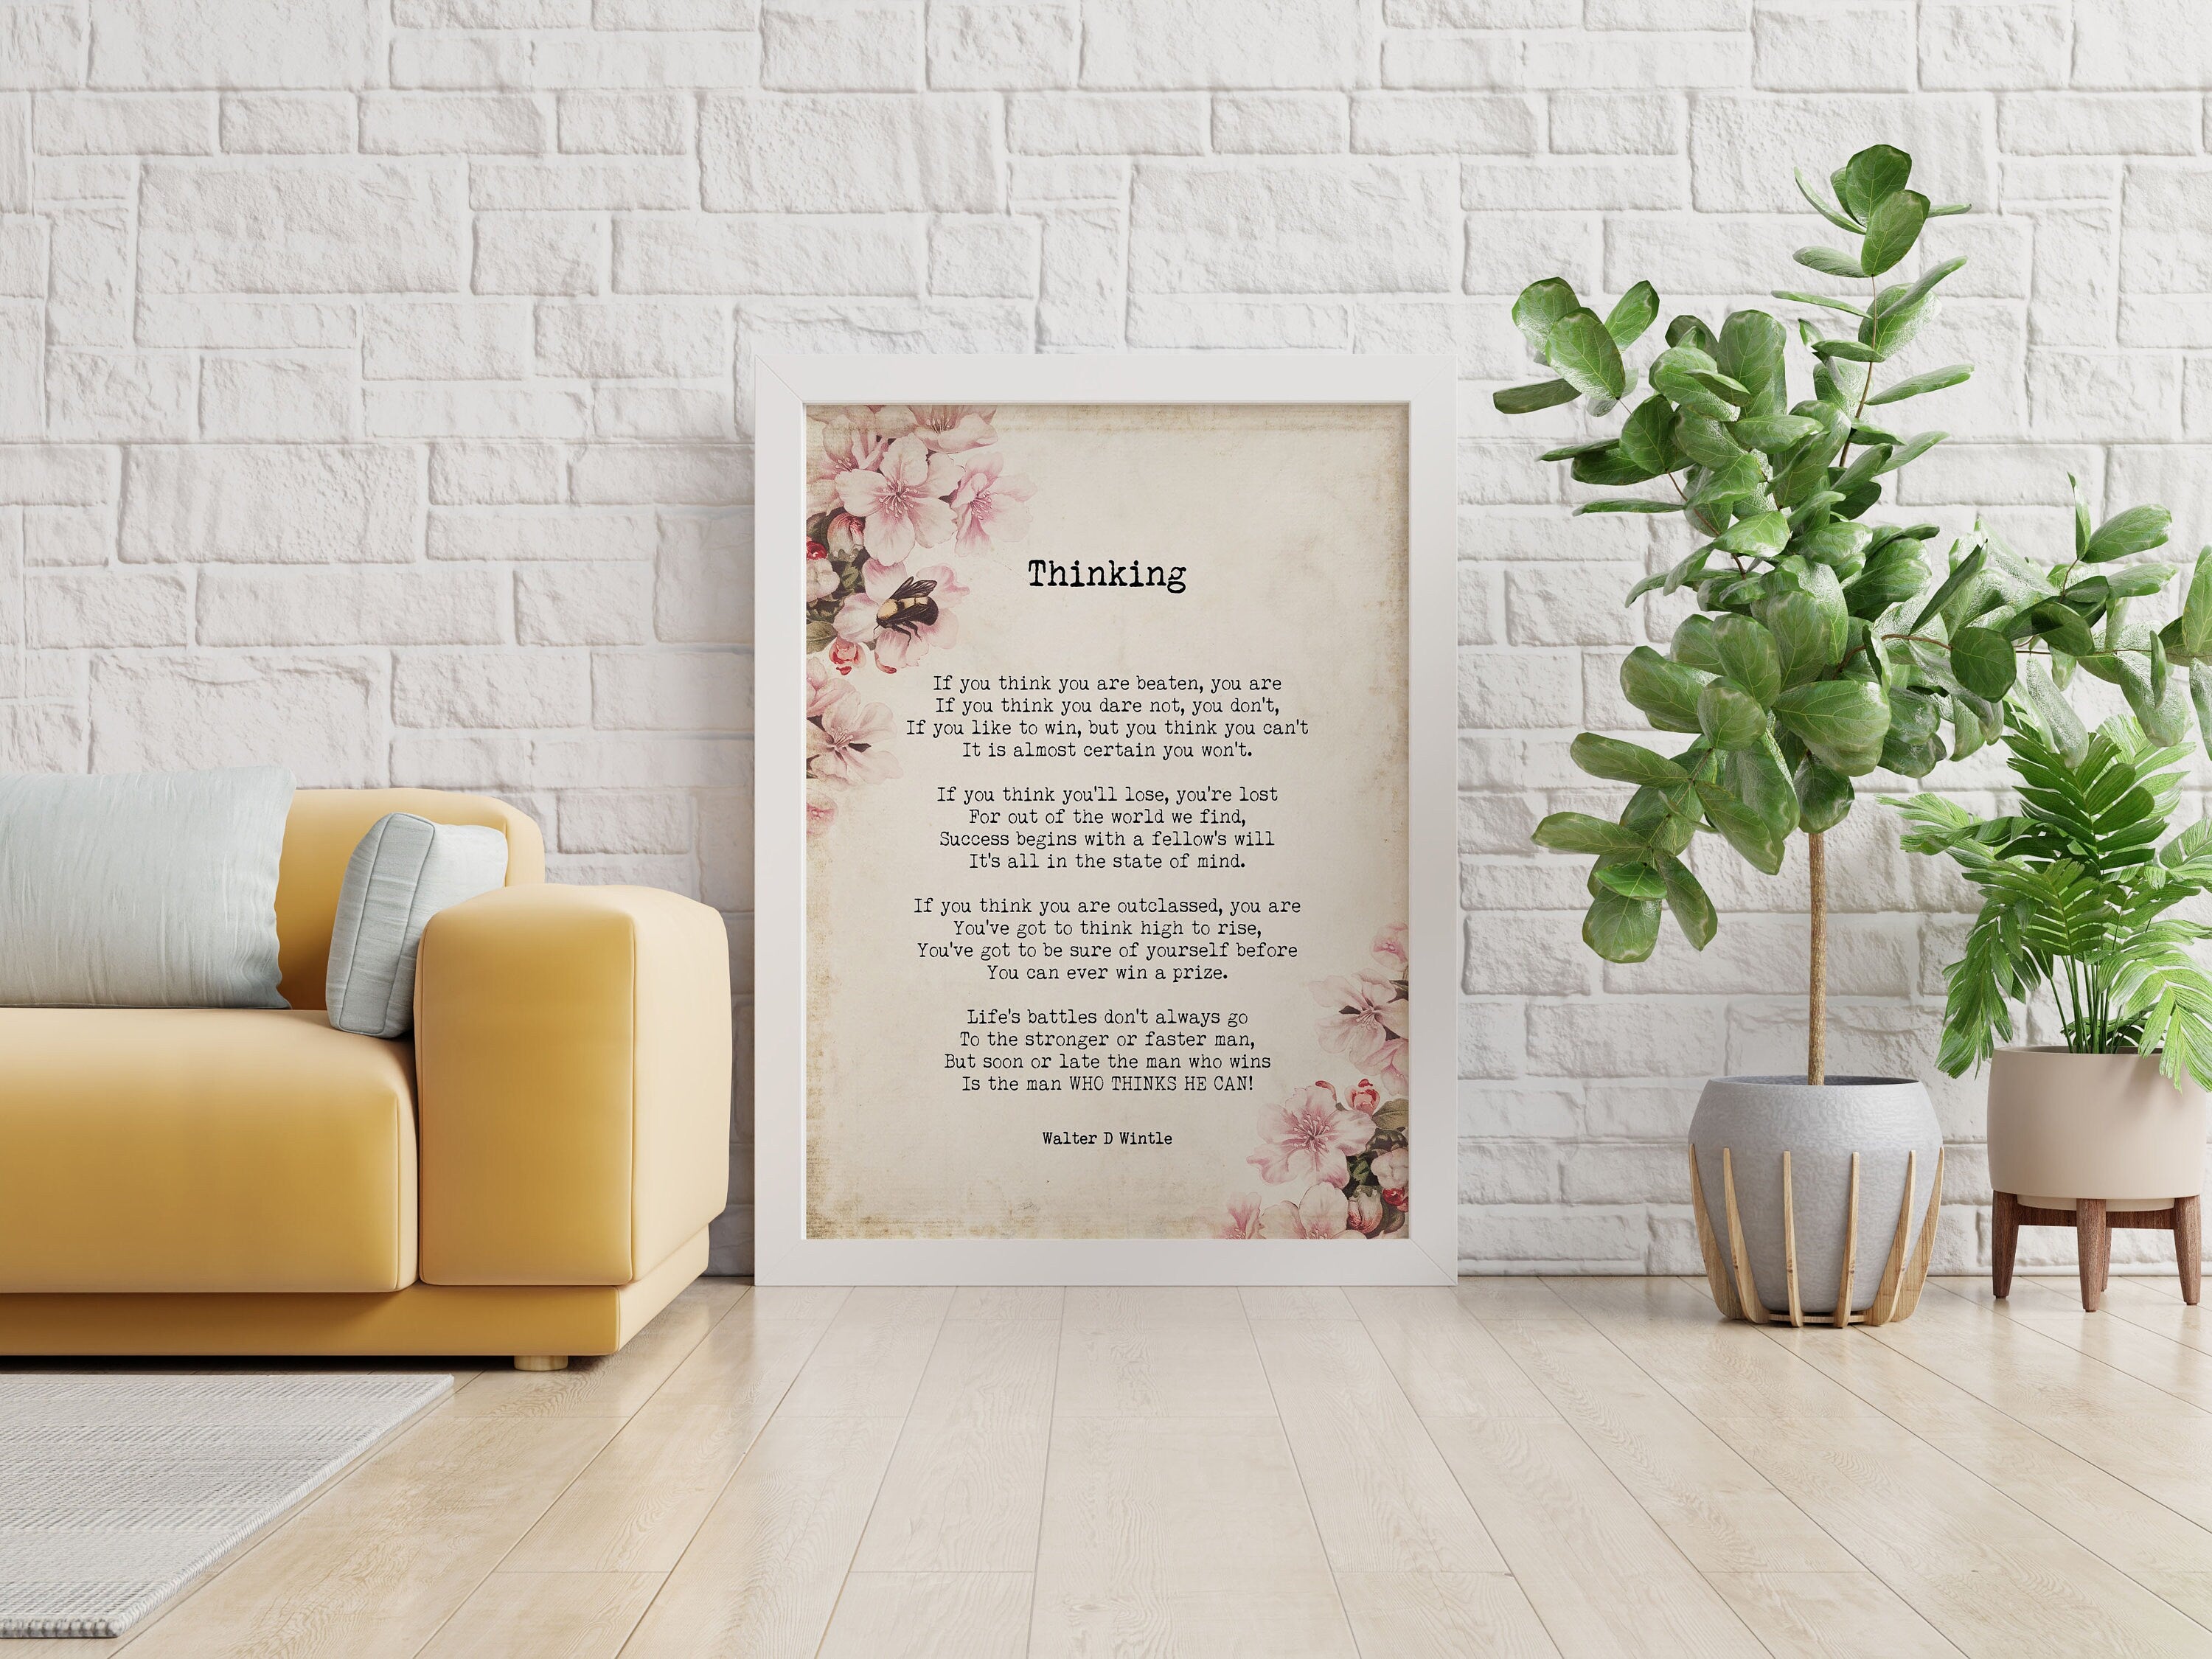 Thinking Walter D Wintle Inspirational Wall Art Prints, Framed and Unframed Watercolour Nature Decor